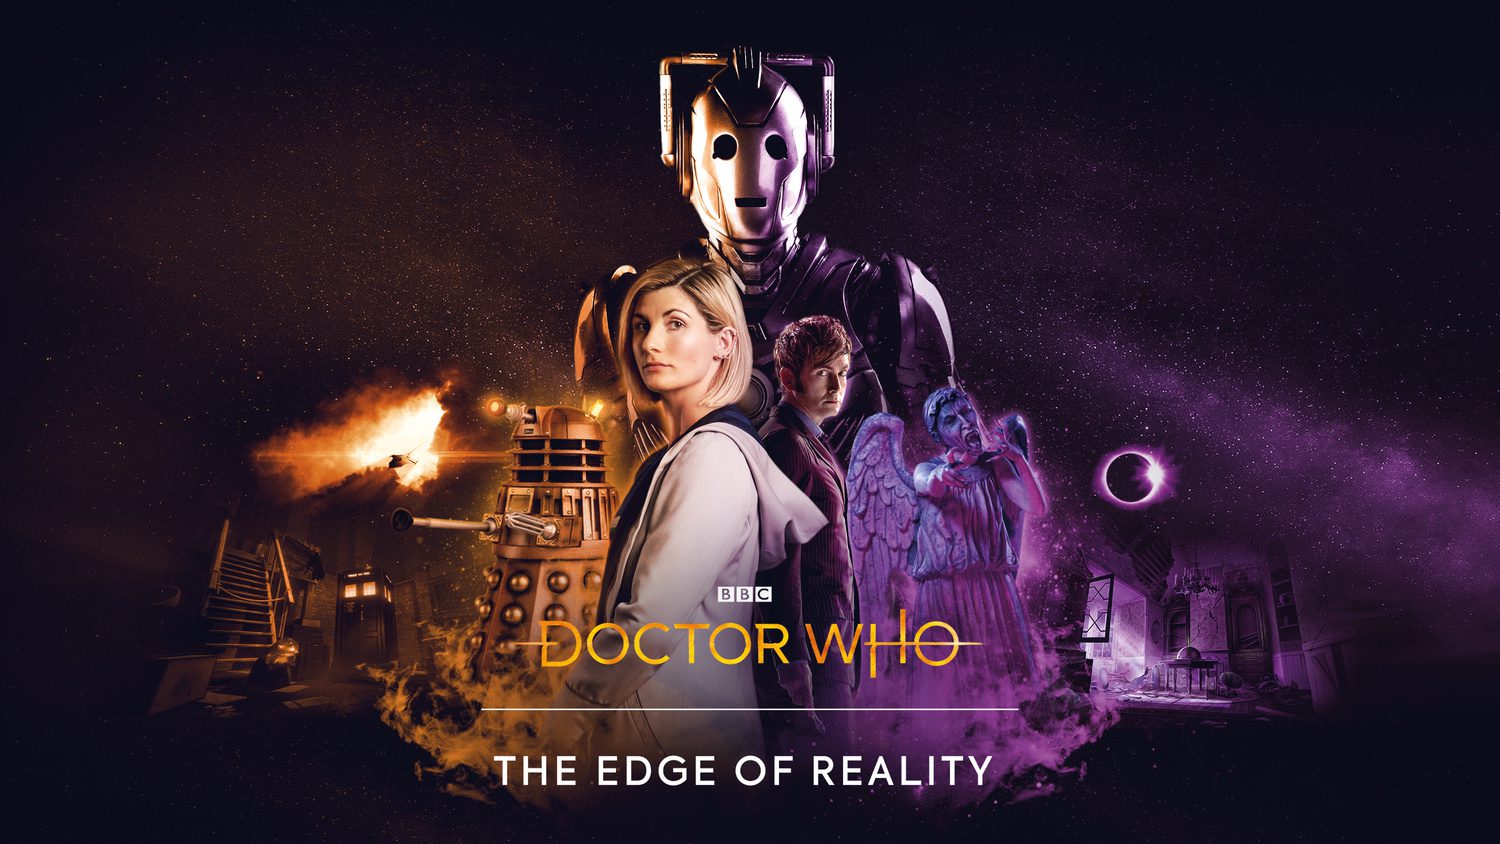 ‘Doctor Who: The Edge of Reality’ Launches